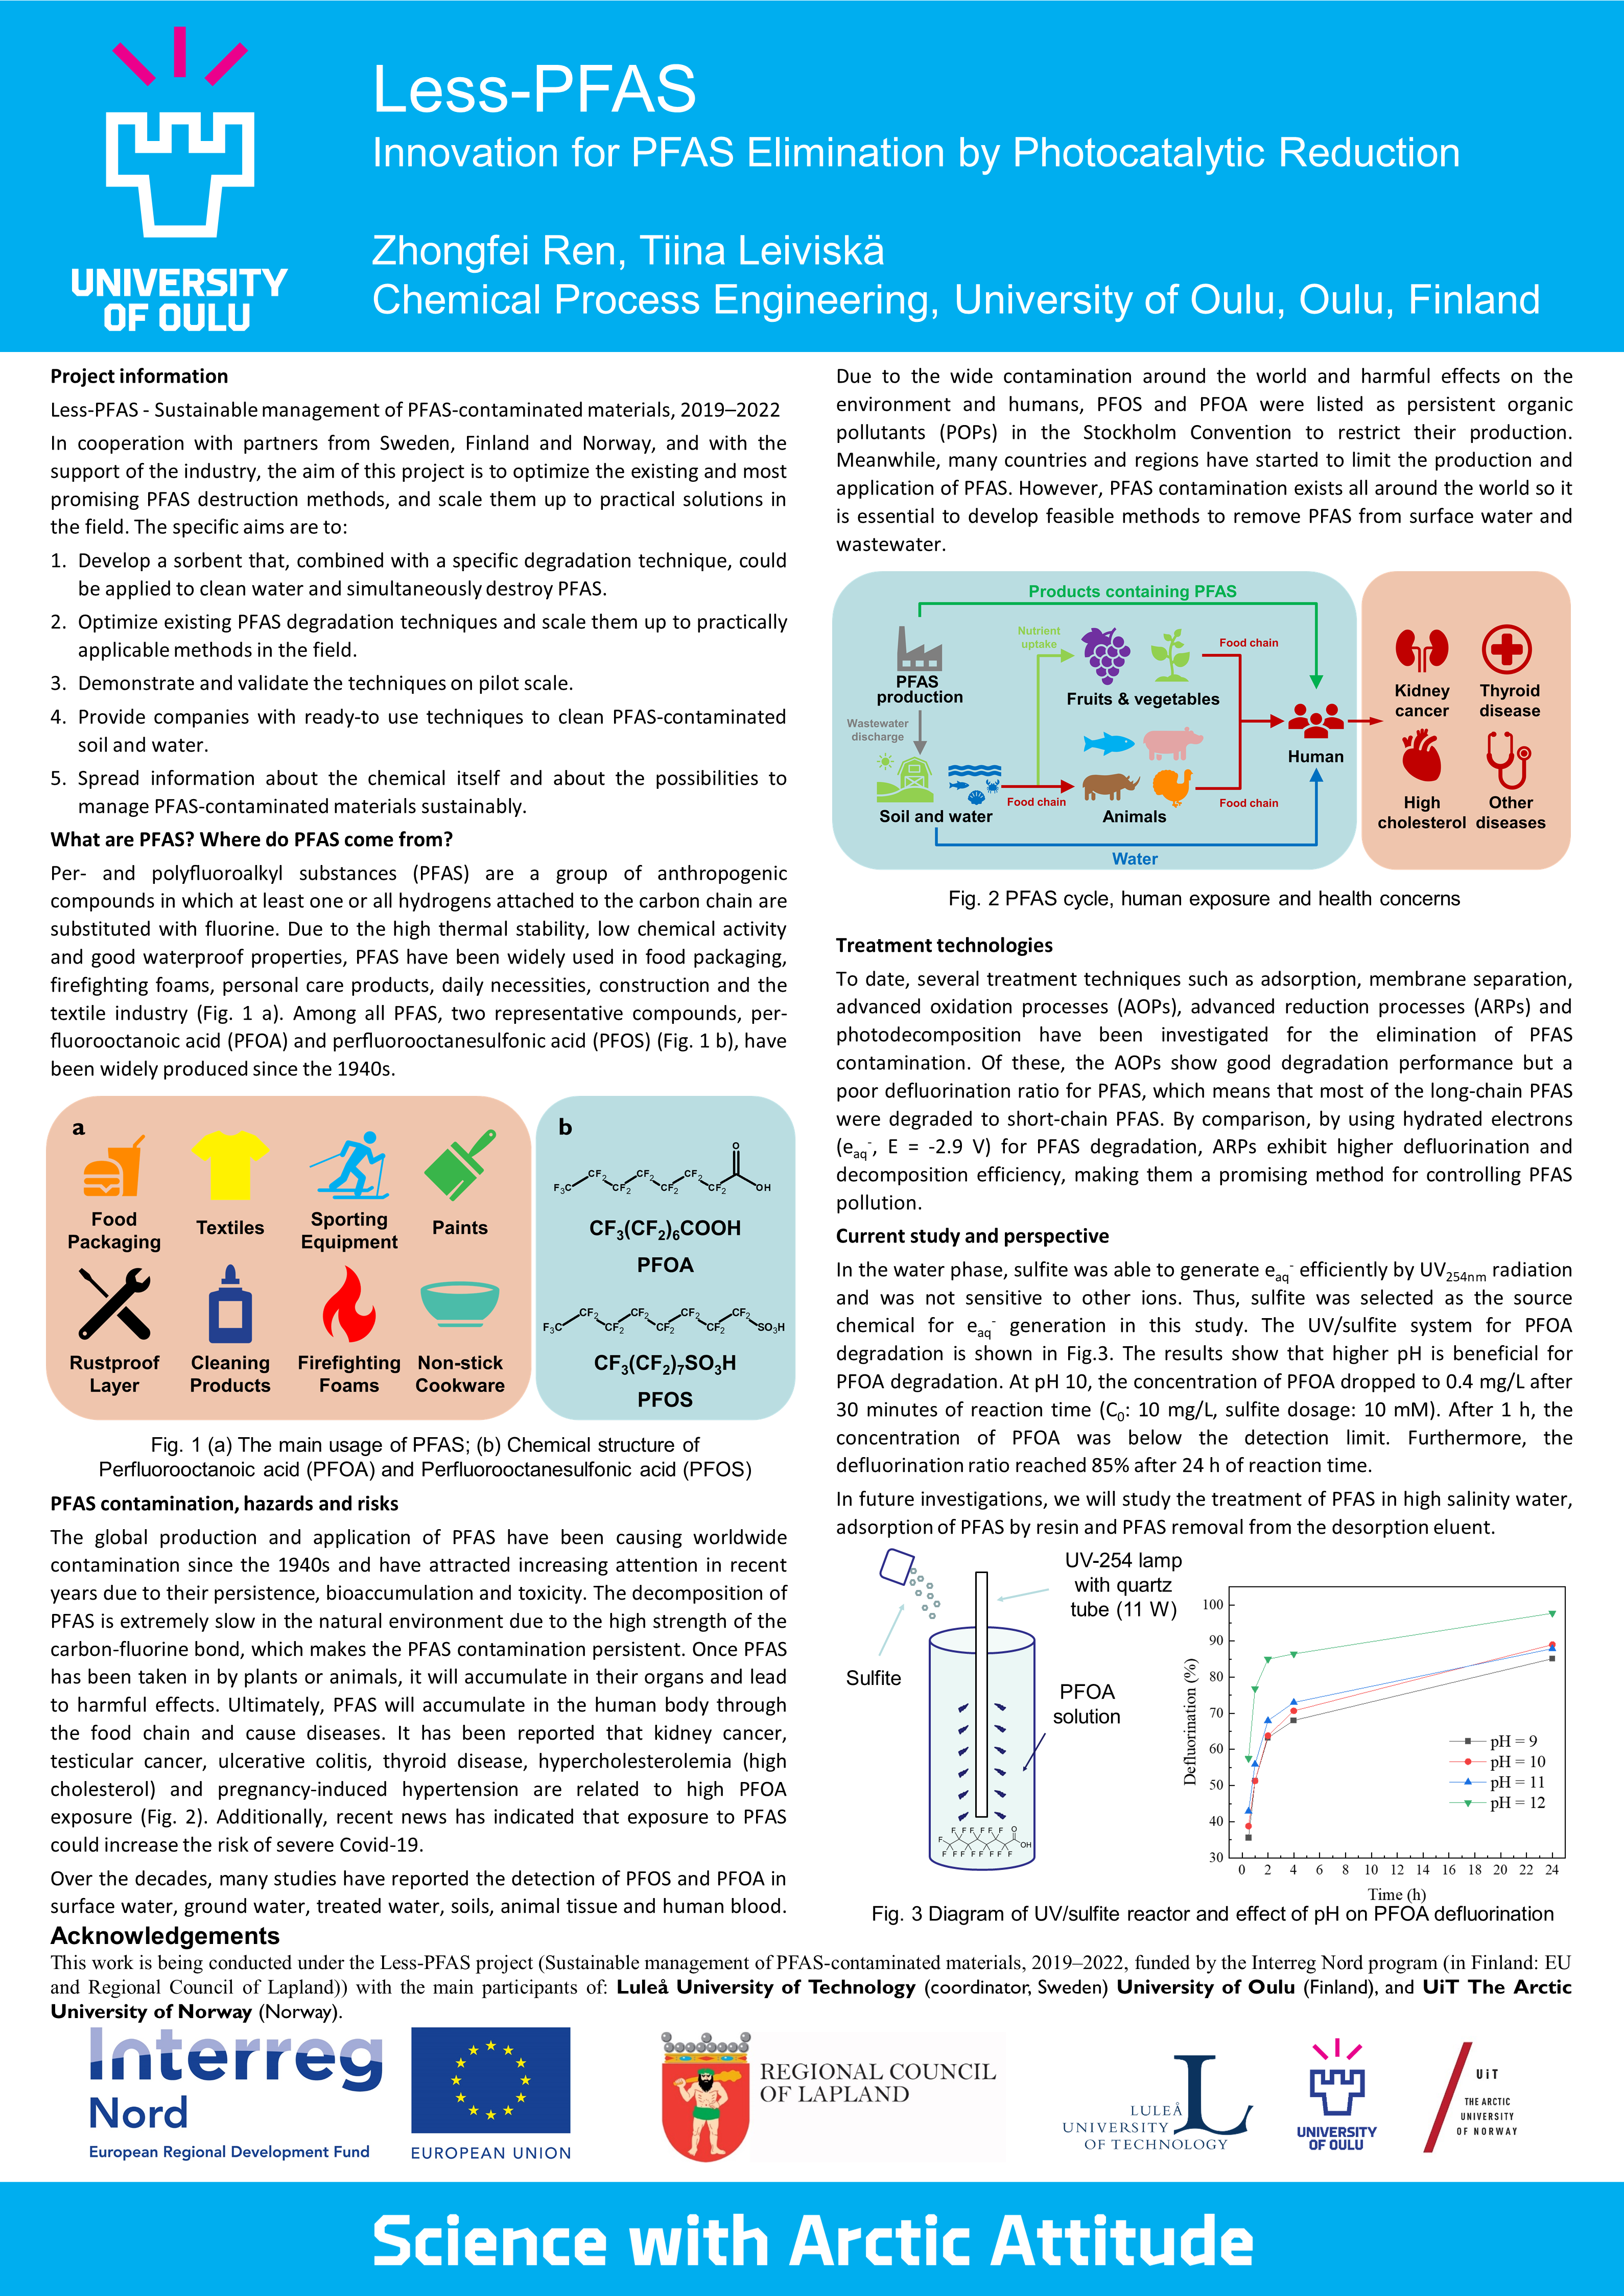 A picture of the poster prepared in the Less-PFAS project in March 2021 by Zhongfei Ren and Tiina Leiviskä